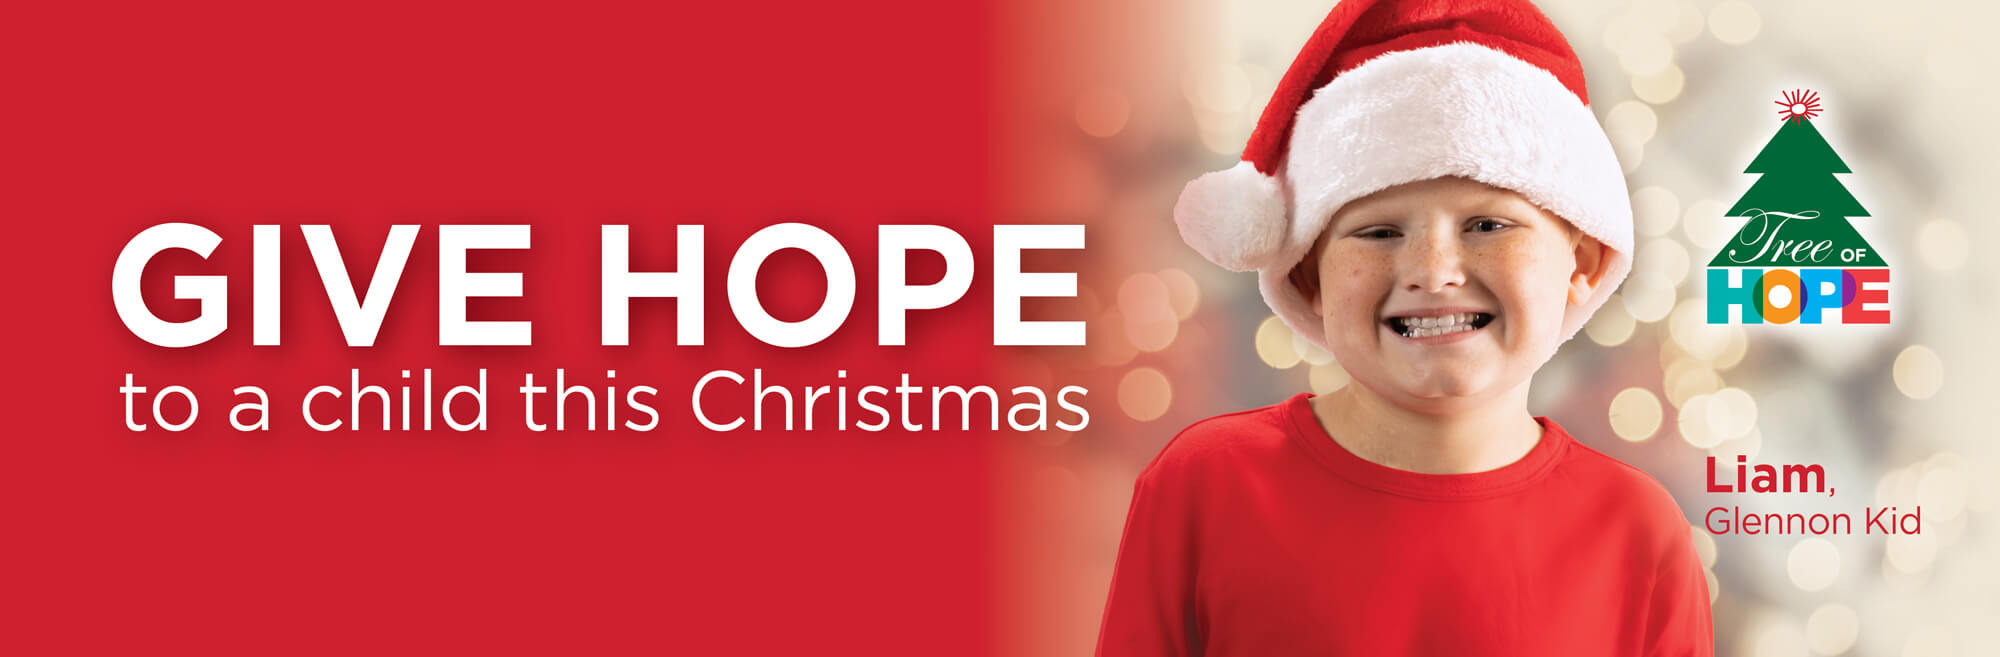 Tree of Hope web header - "Give Hope to a child this Christmas." Picture of Liam - Glennon kid